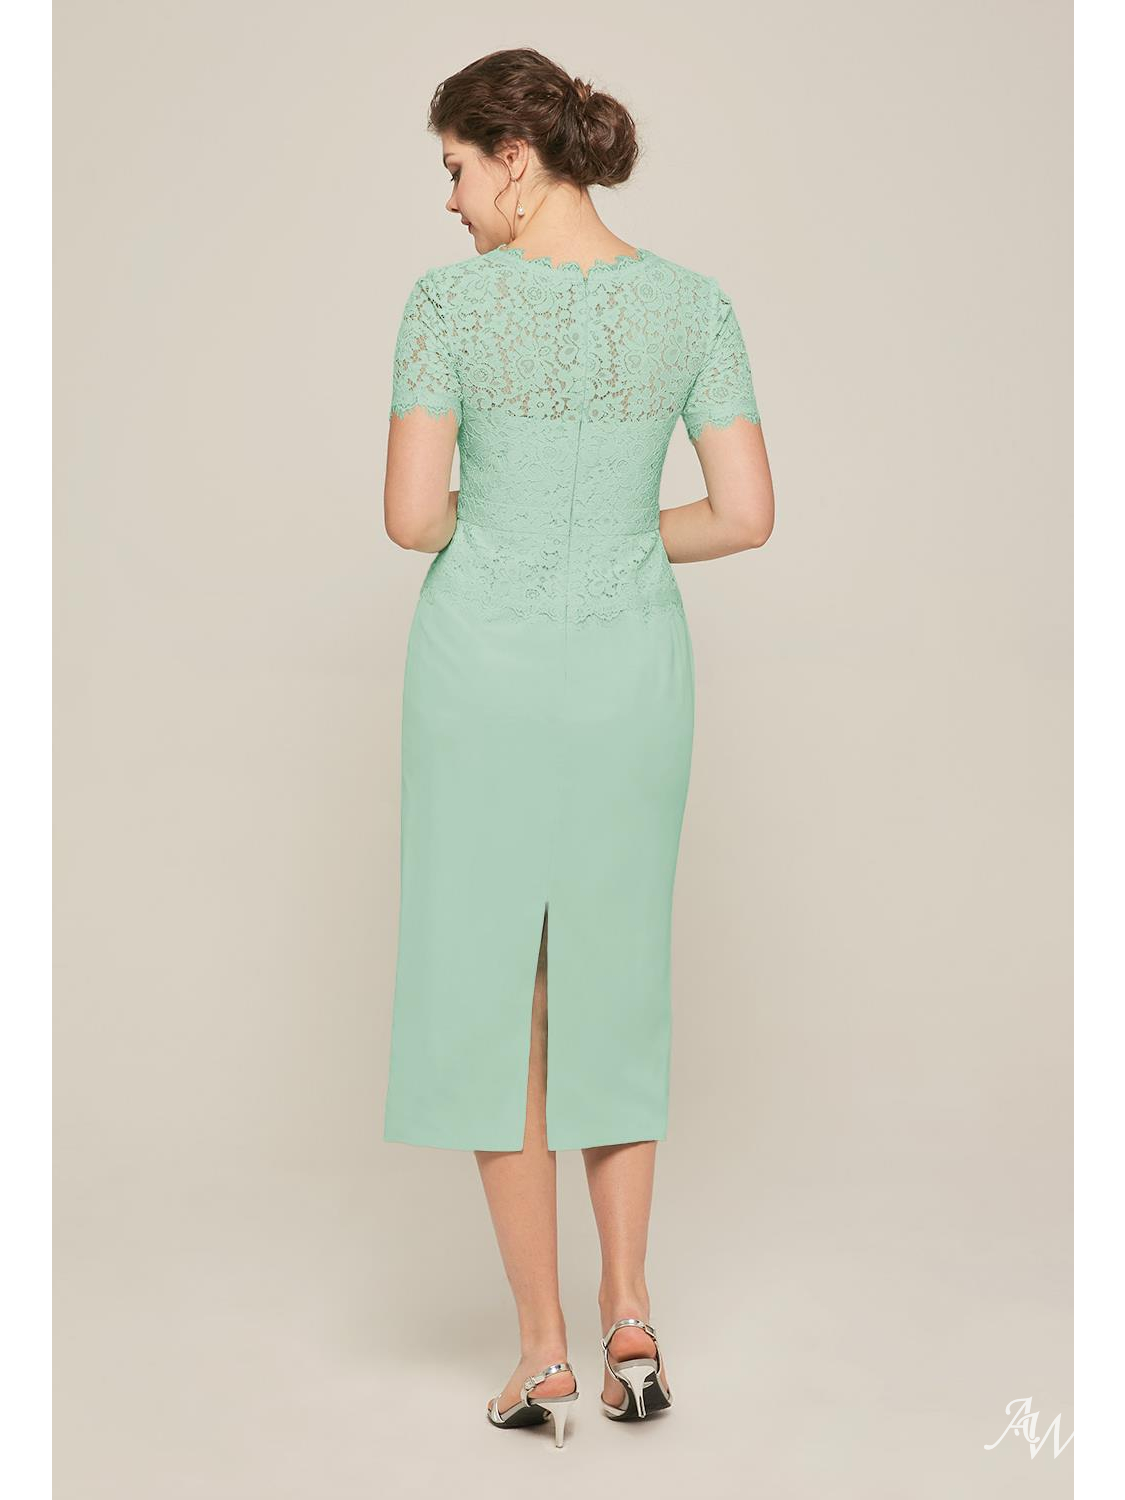 AW Zenia Dress, Mint Green Mother of the Bride Dresses, 99.99 | AW Bridal